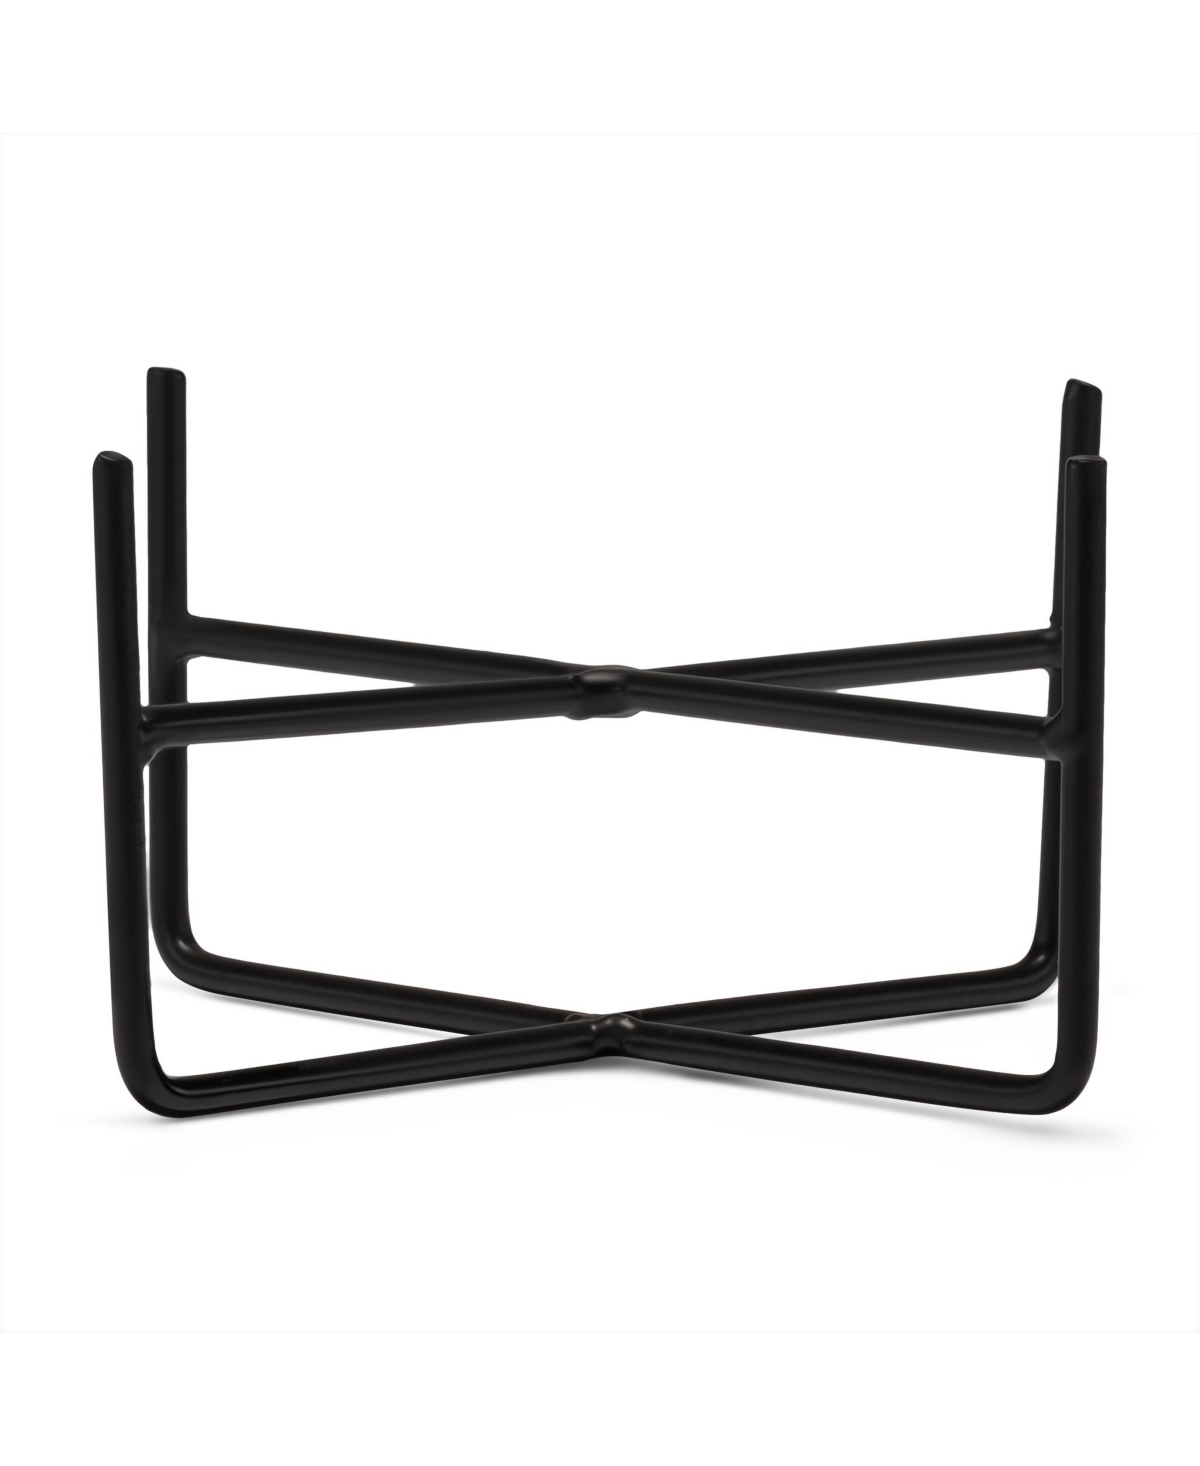 Dog Simple Solid Stand - Matte Black - Small - Black